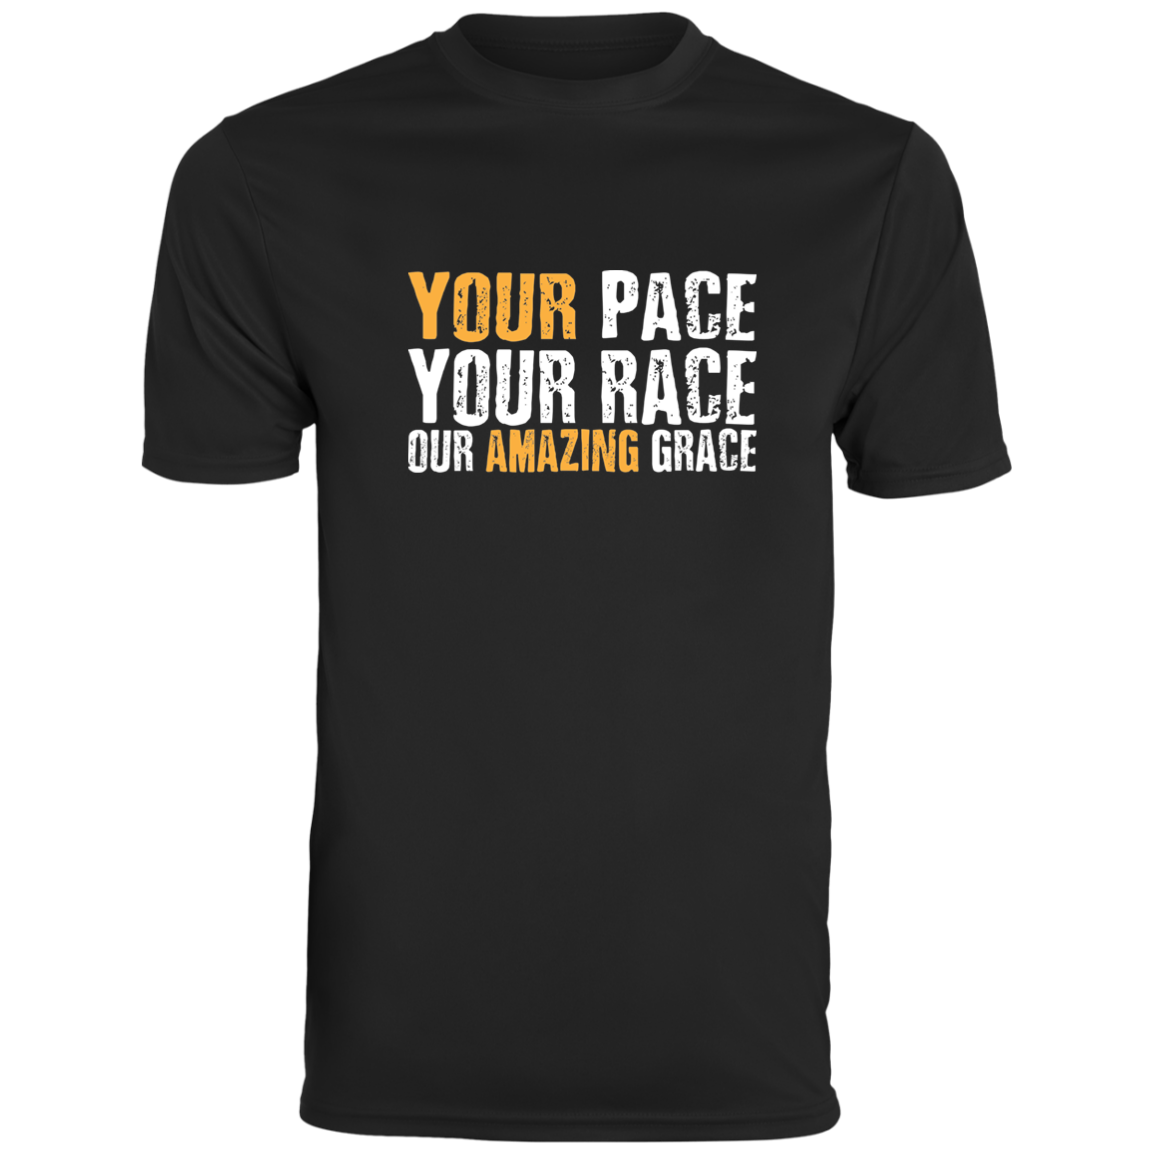 Men's Inspirational Top Your Pace, Your Race, Your Amazing Grace